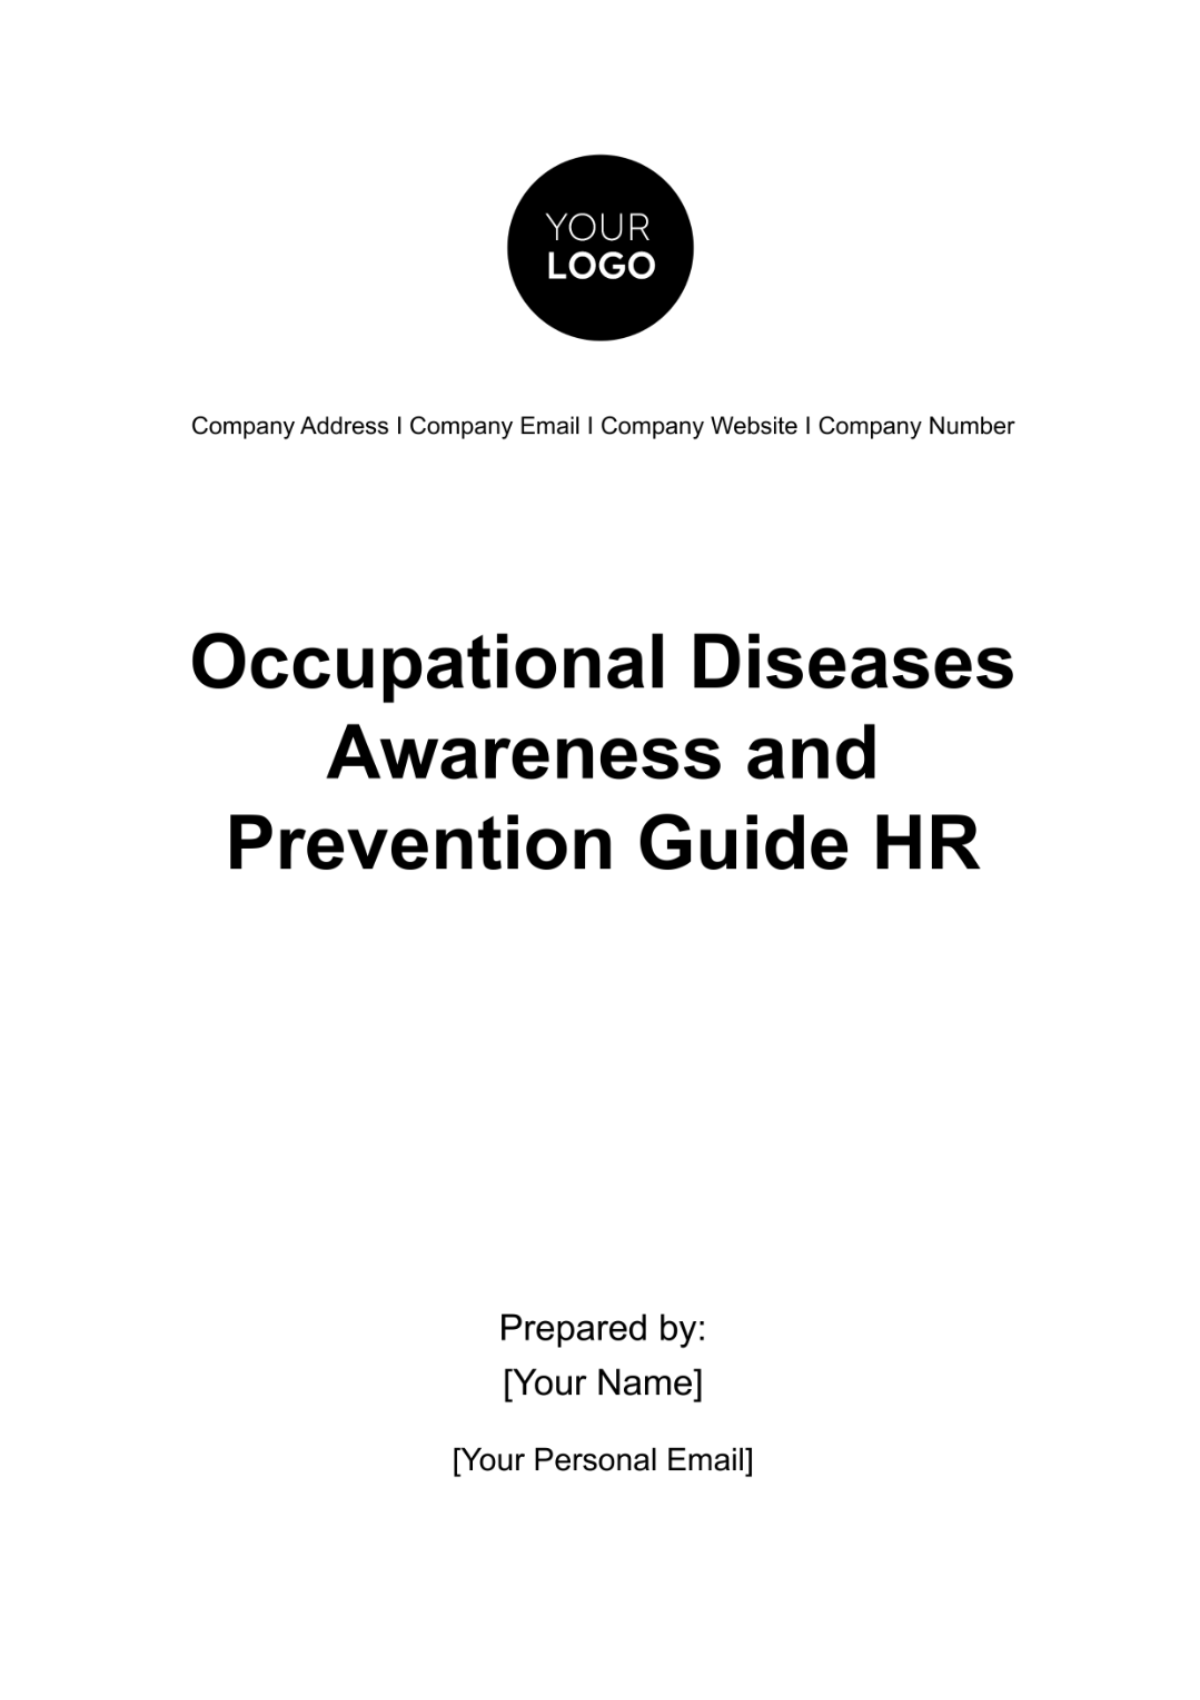 Free Occupational Diseases Awareness and Prevention Guide HR Template